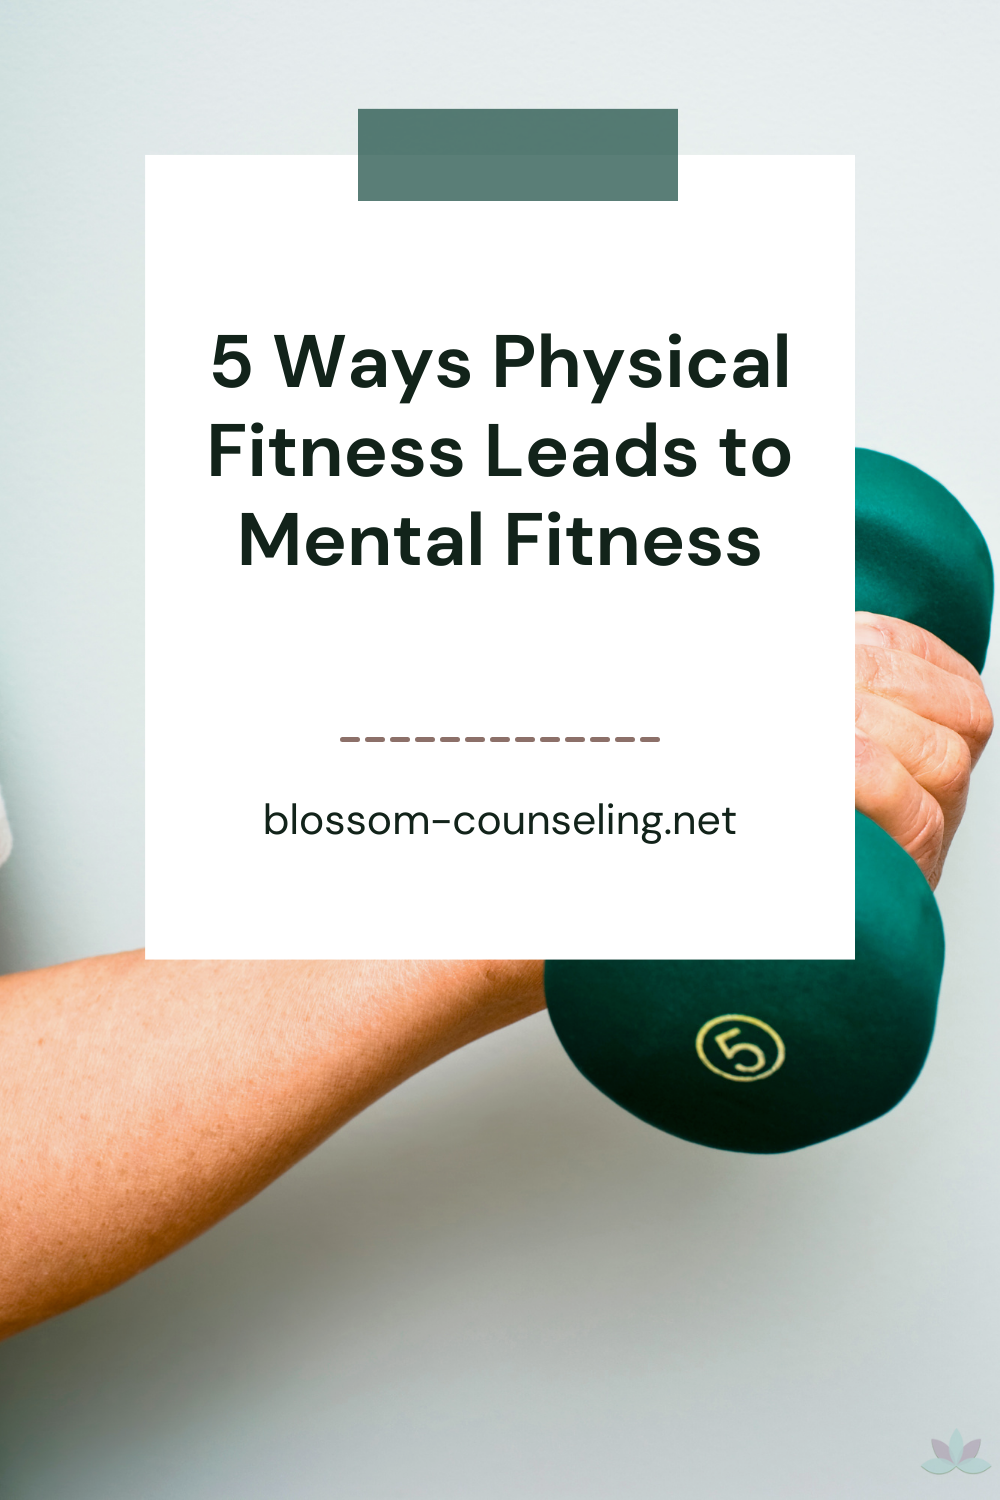 5 Ways Physical Fitness Leads to Mental Fitness